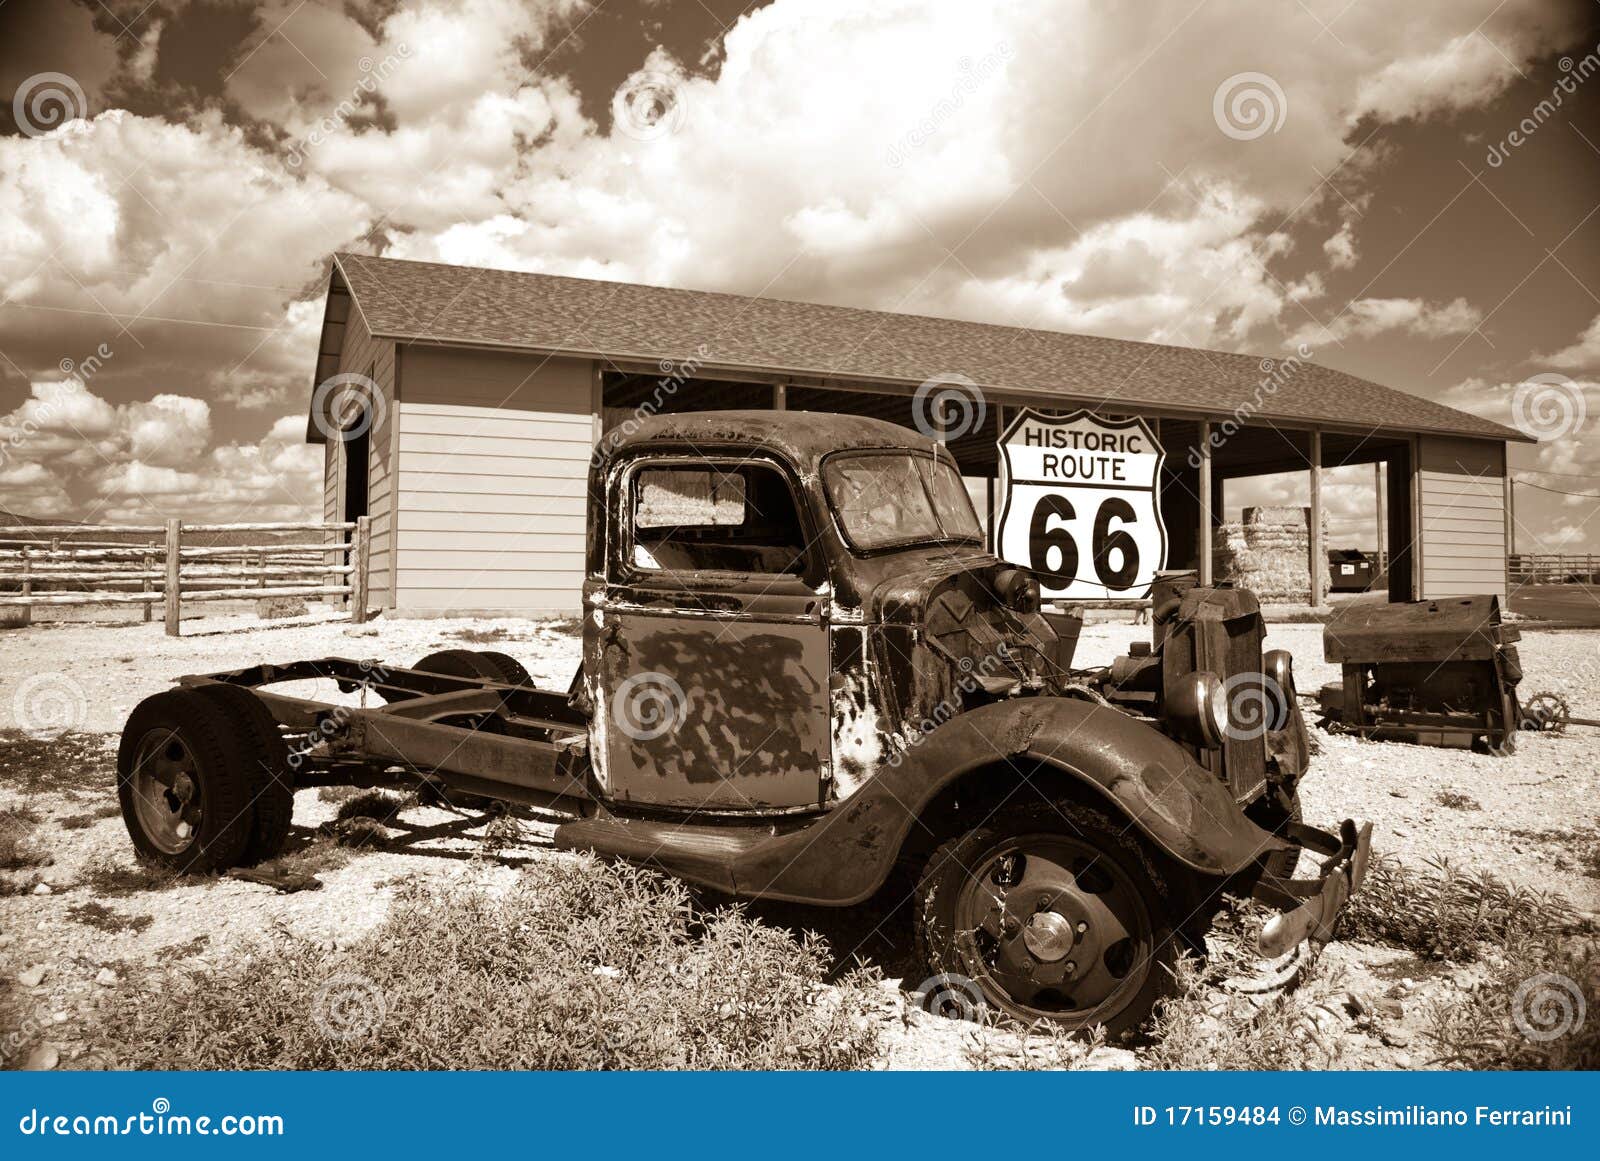 old truck on old route 66